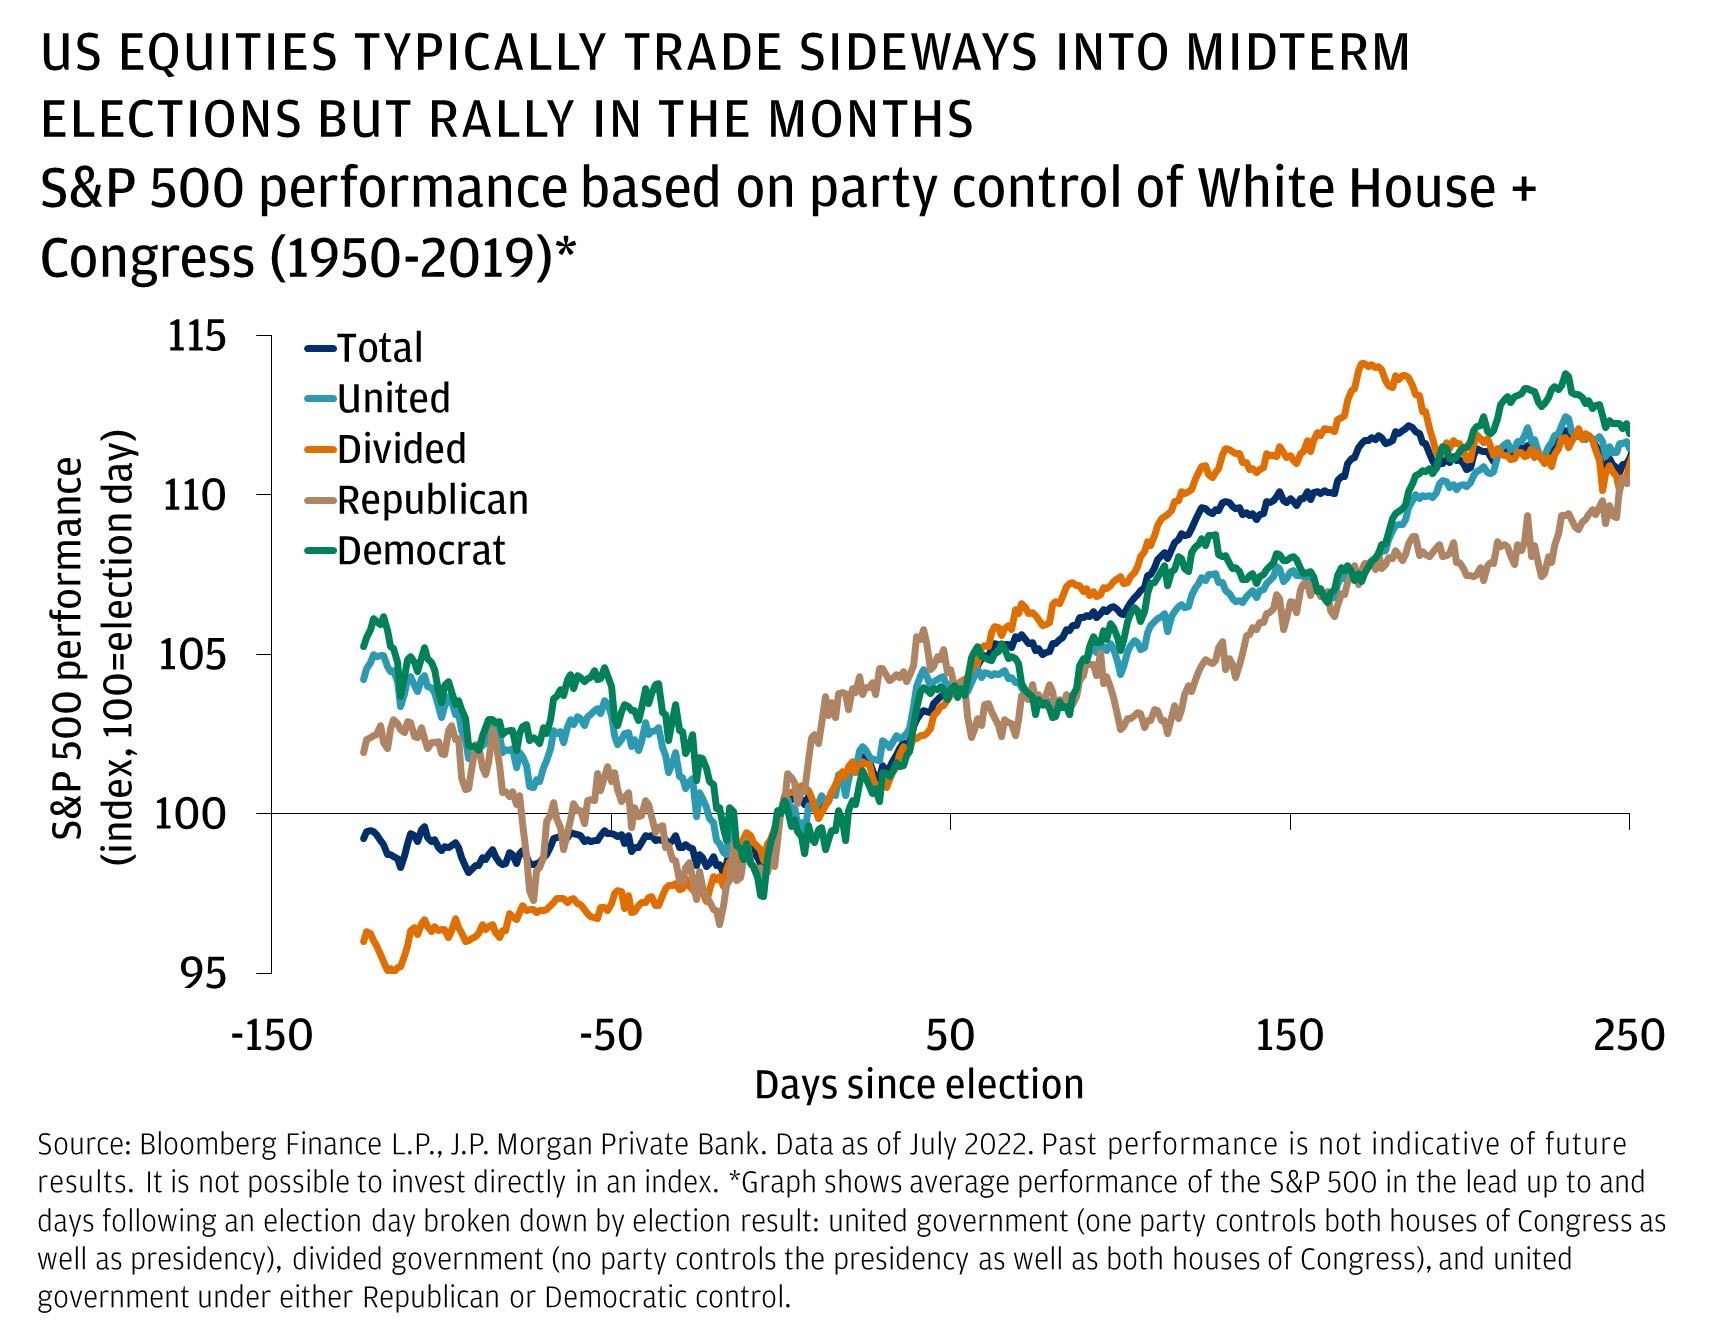 This chart shows the S&P 500 performance based on party control of White House + Congress (Democrat, Republican, divided, united, total), 150 days before the election until 250 days after the election (index, 100 = election day). 